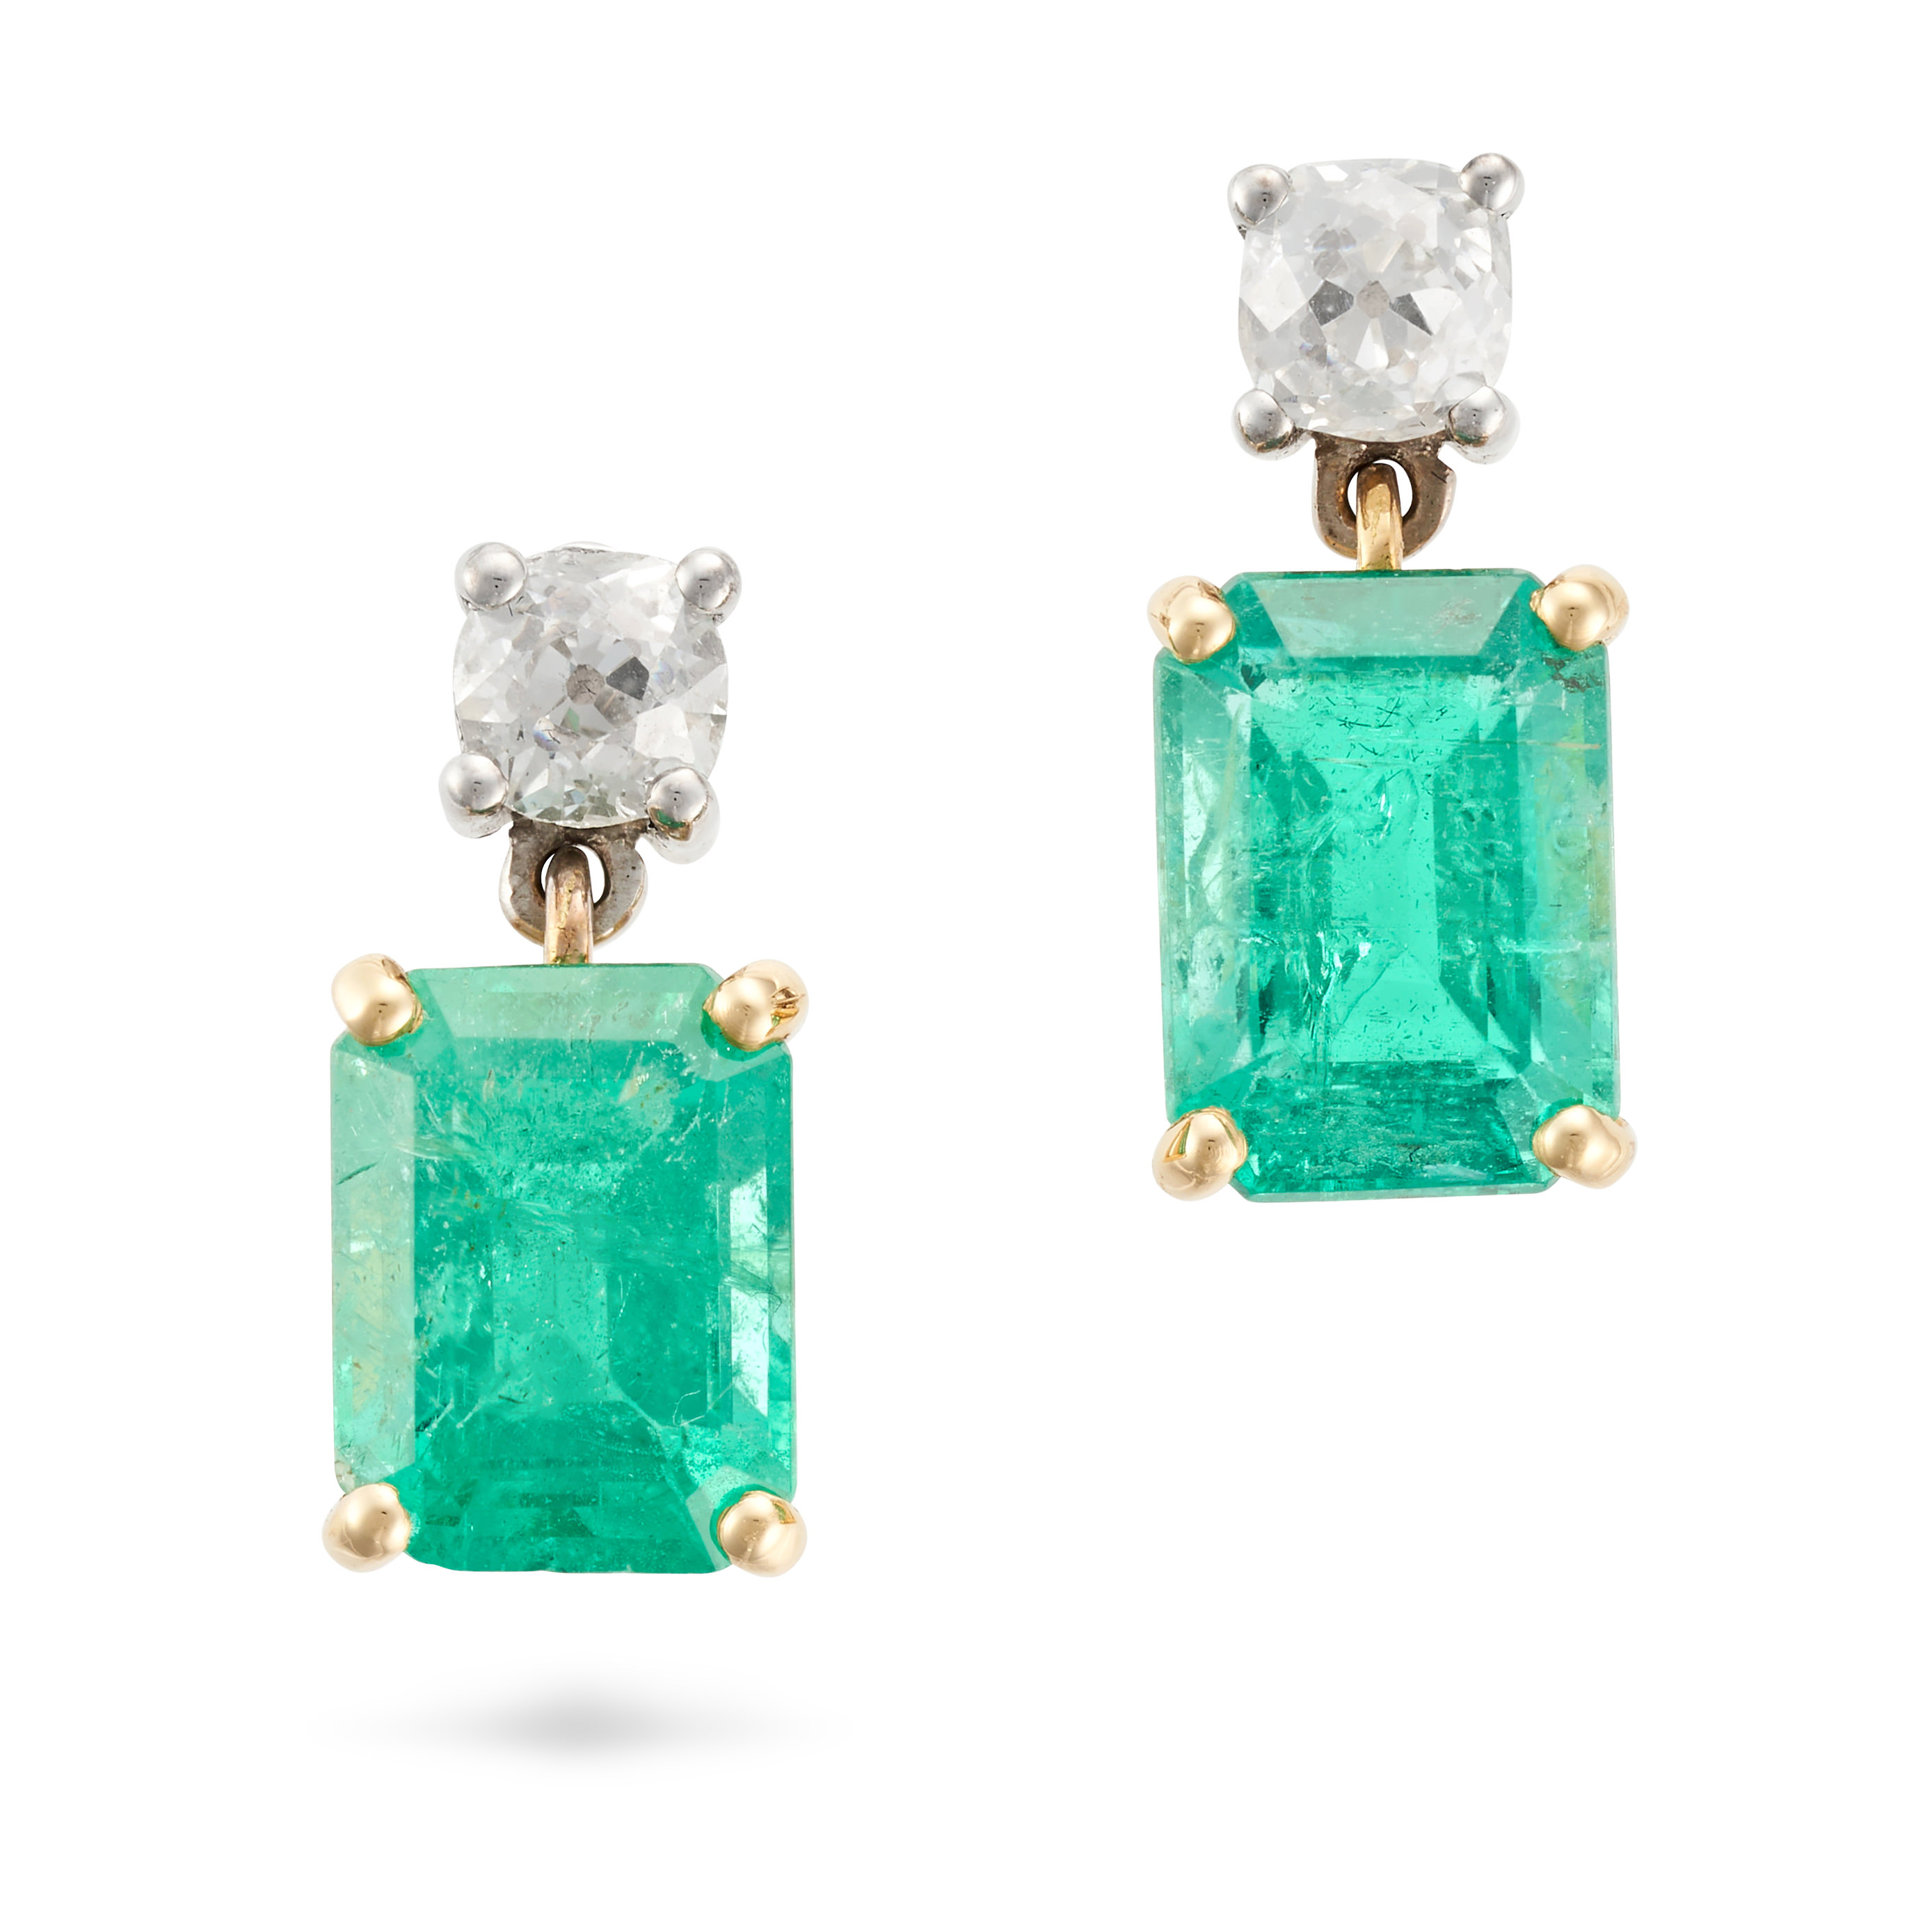 A PAIR OF DIAMOND AND EMERALD DROP EARRINGS each set with a round brilliant cut diamond suspendin...